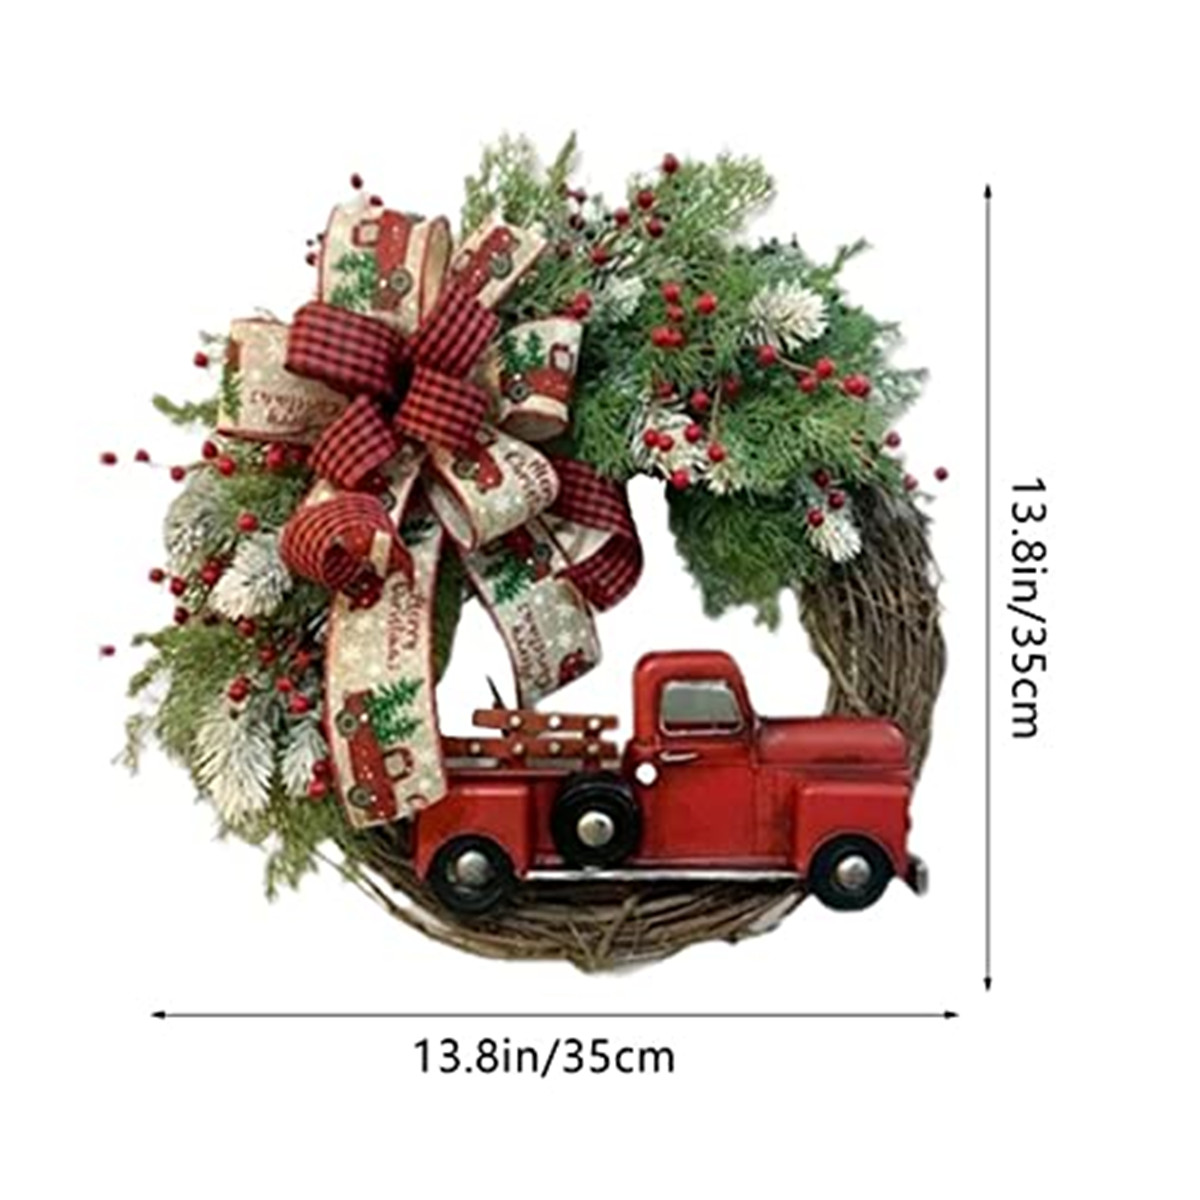 14" Red Truck Christmas Wreath-Vintage Truck Berry Autumn Wreath at The Front Door-Wooden Hanging Wreath for Indoor and Outdoor Decoration - image 2 of 7